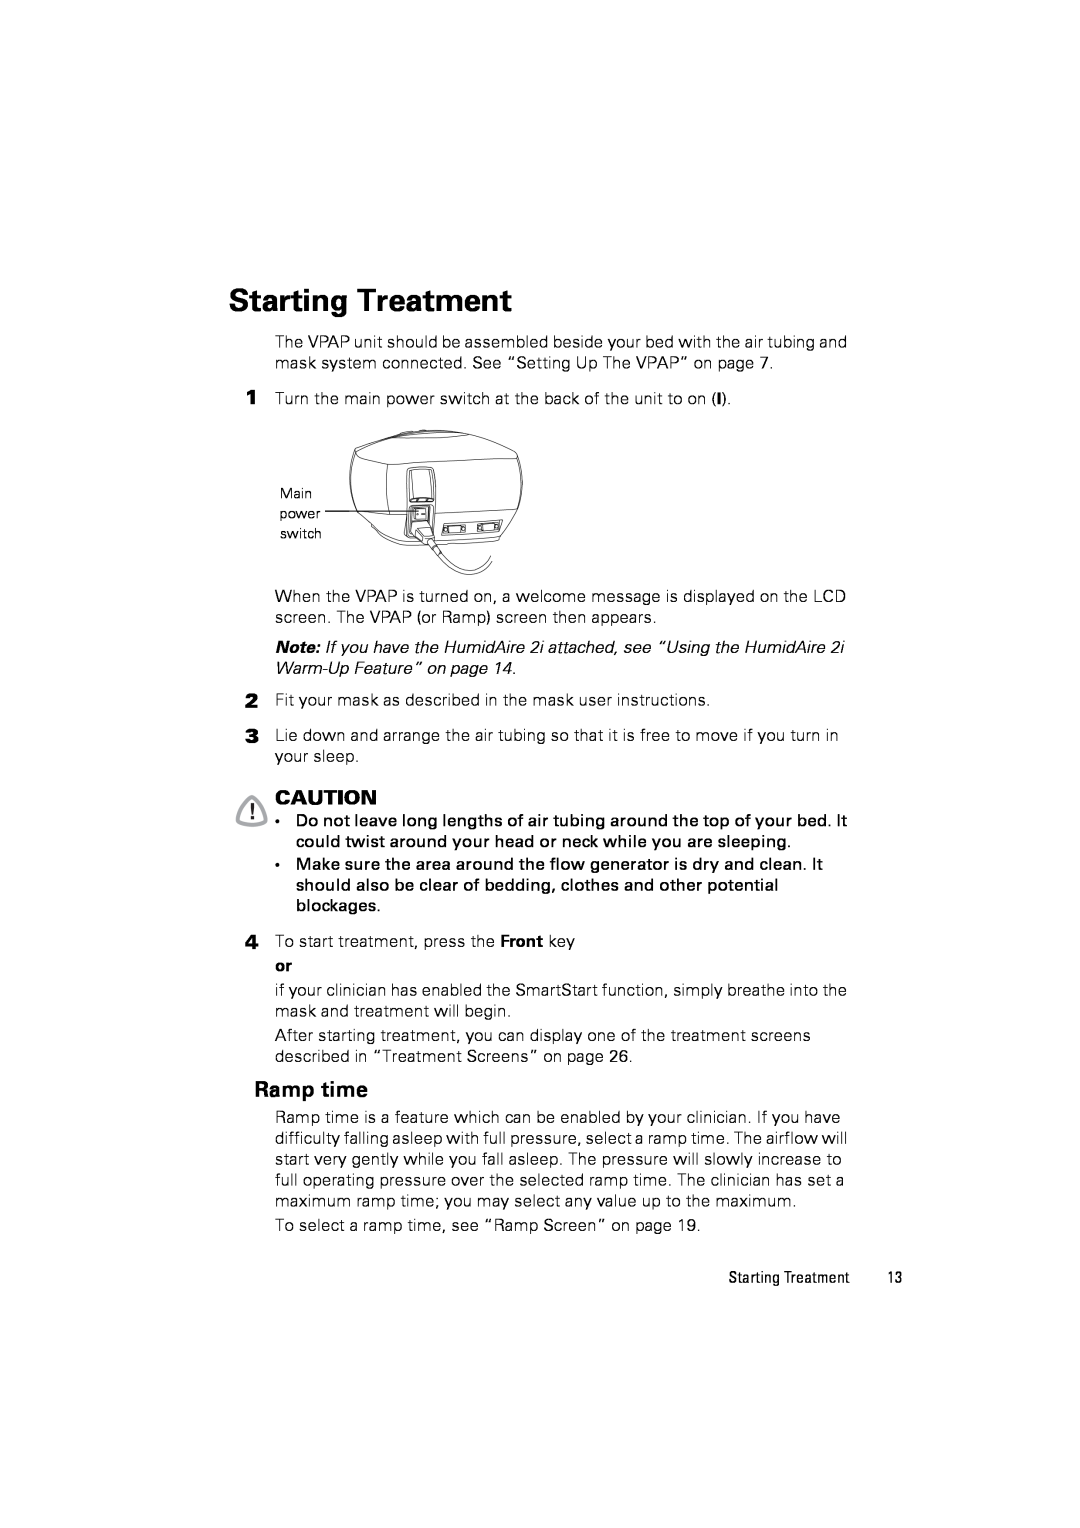 ResMed III user manual Starting Treatment, Ramp time 